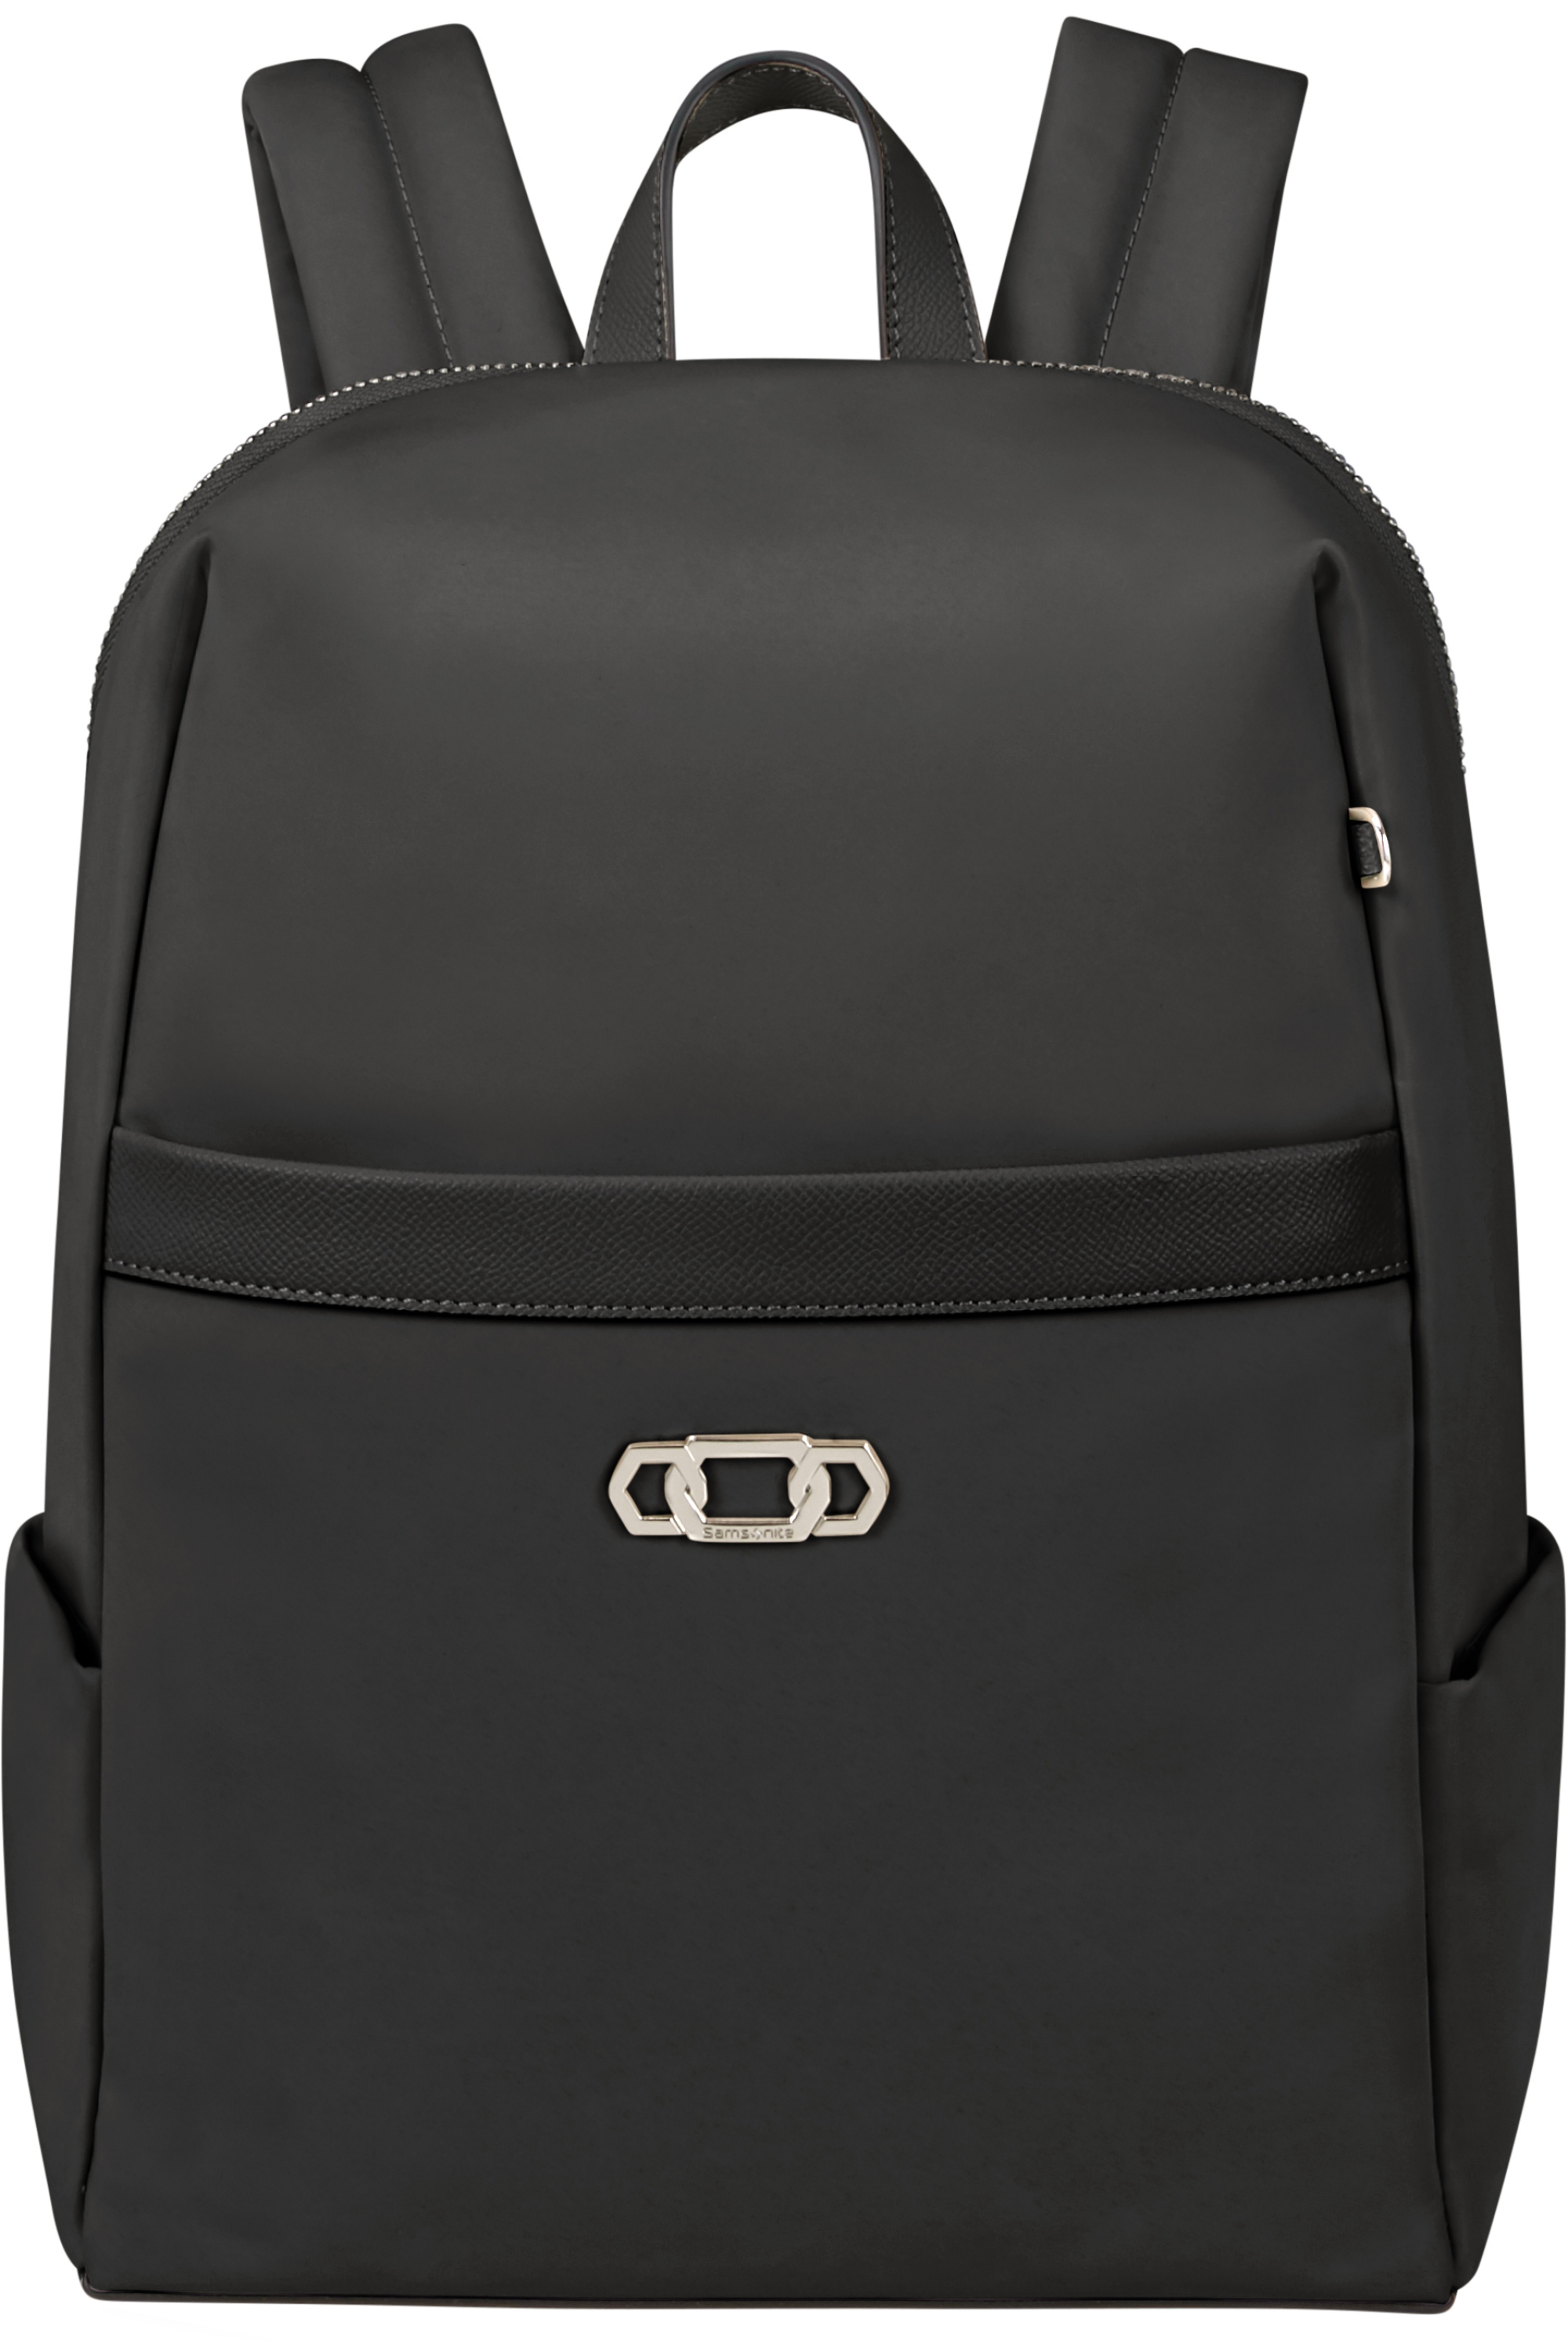 142610-1041-142610_1041_amneris_daily_backpack_front-5b0f8e4a-8a05-4cf0-9054-ae3500d6b39d-png